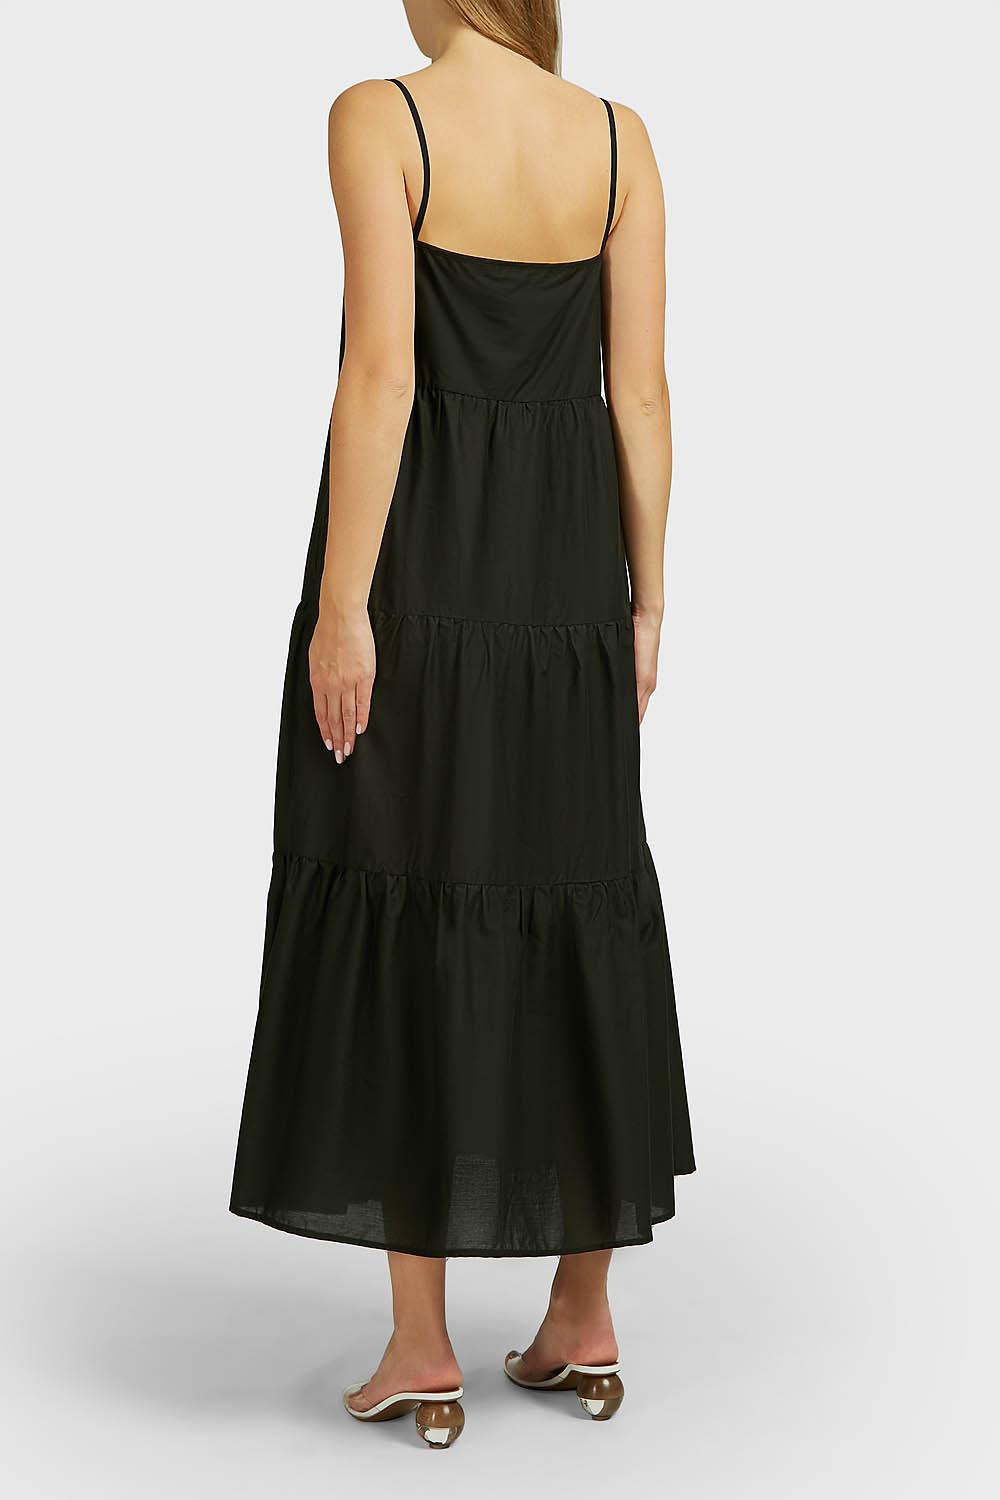 Matteau The Tiered Cotton Maxi Dress in Black - Lyst